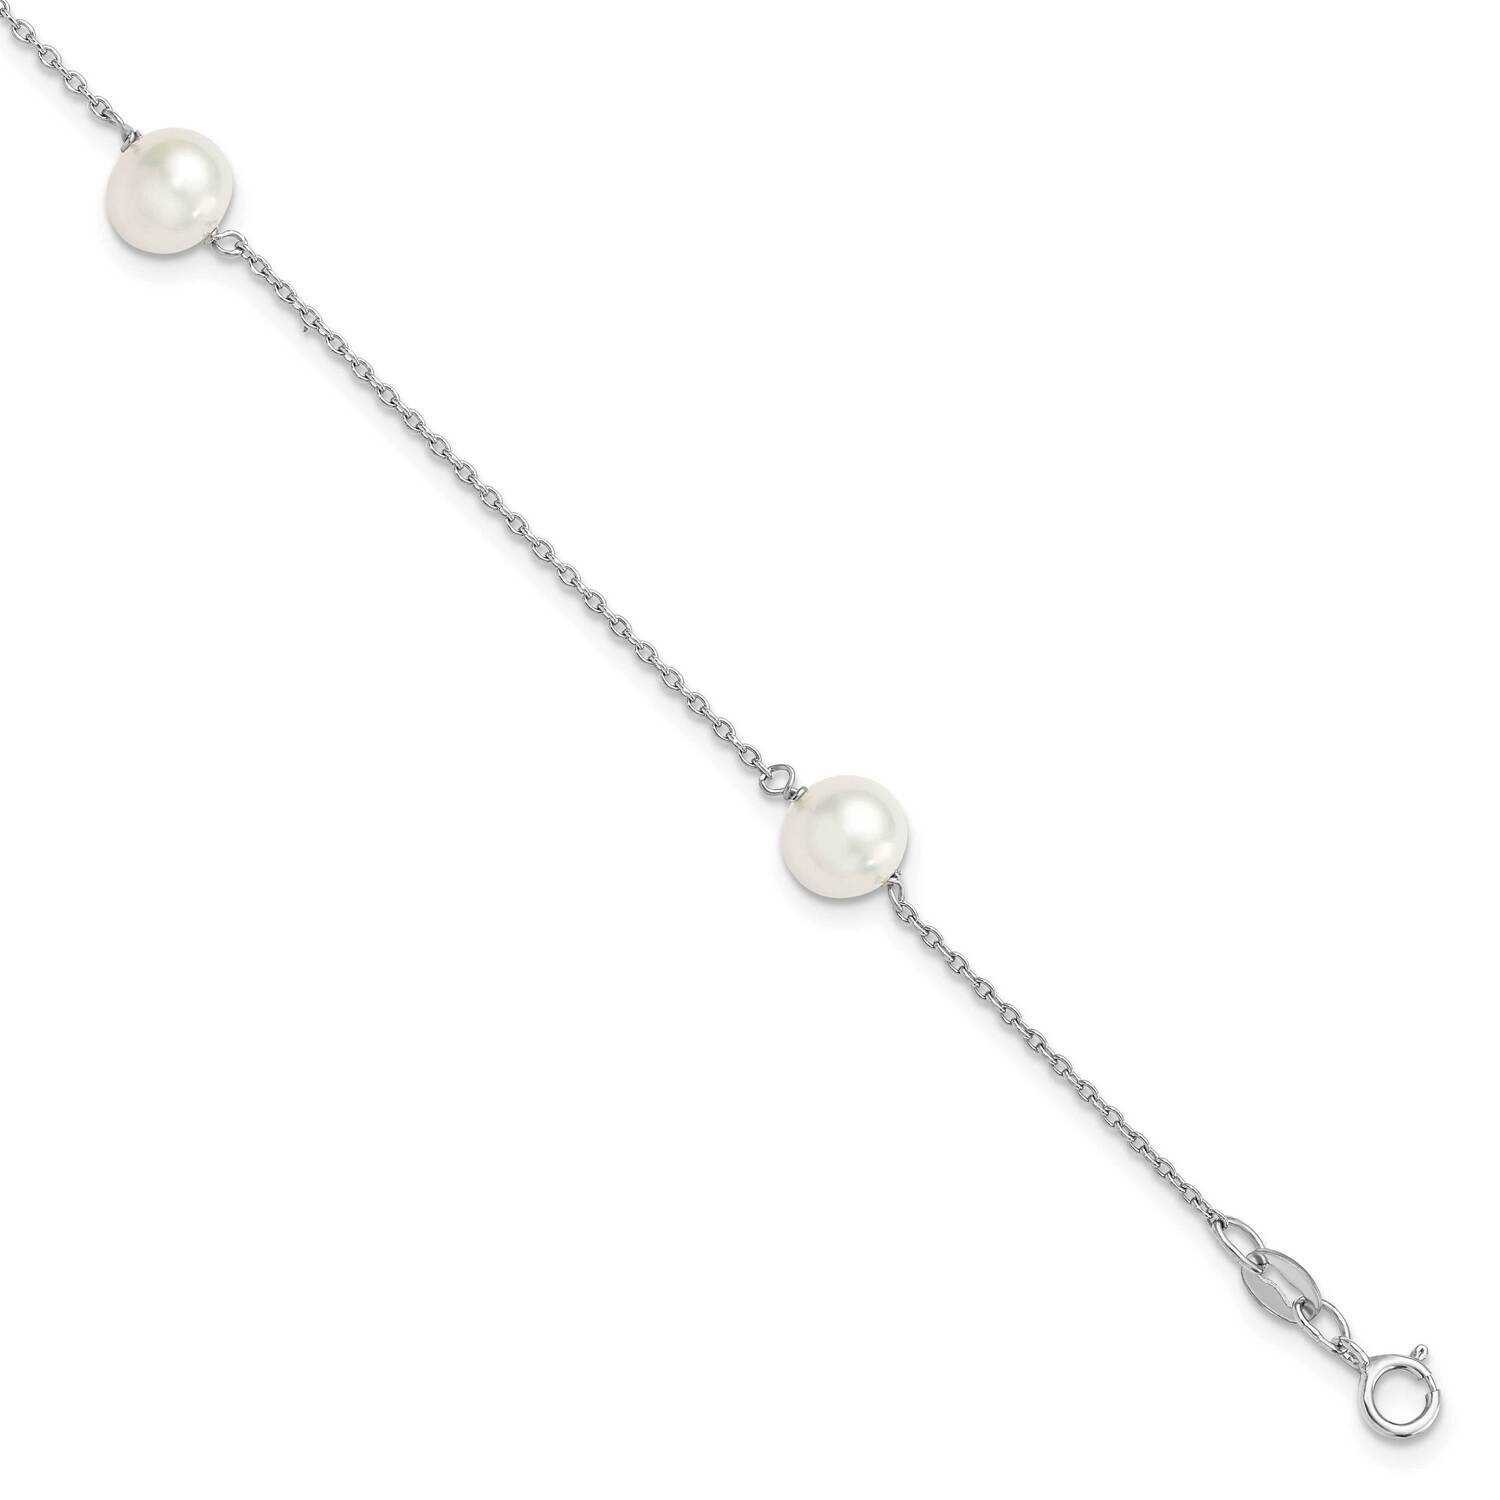 3-Stat 7-8mm White Semi-Round Cultured Freshwater Pearl Bracelet 7.5 Inch Sterling Silver Rhodium-plated QH5236-7.5